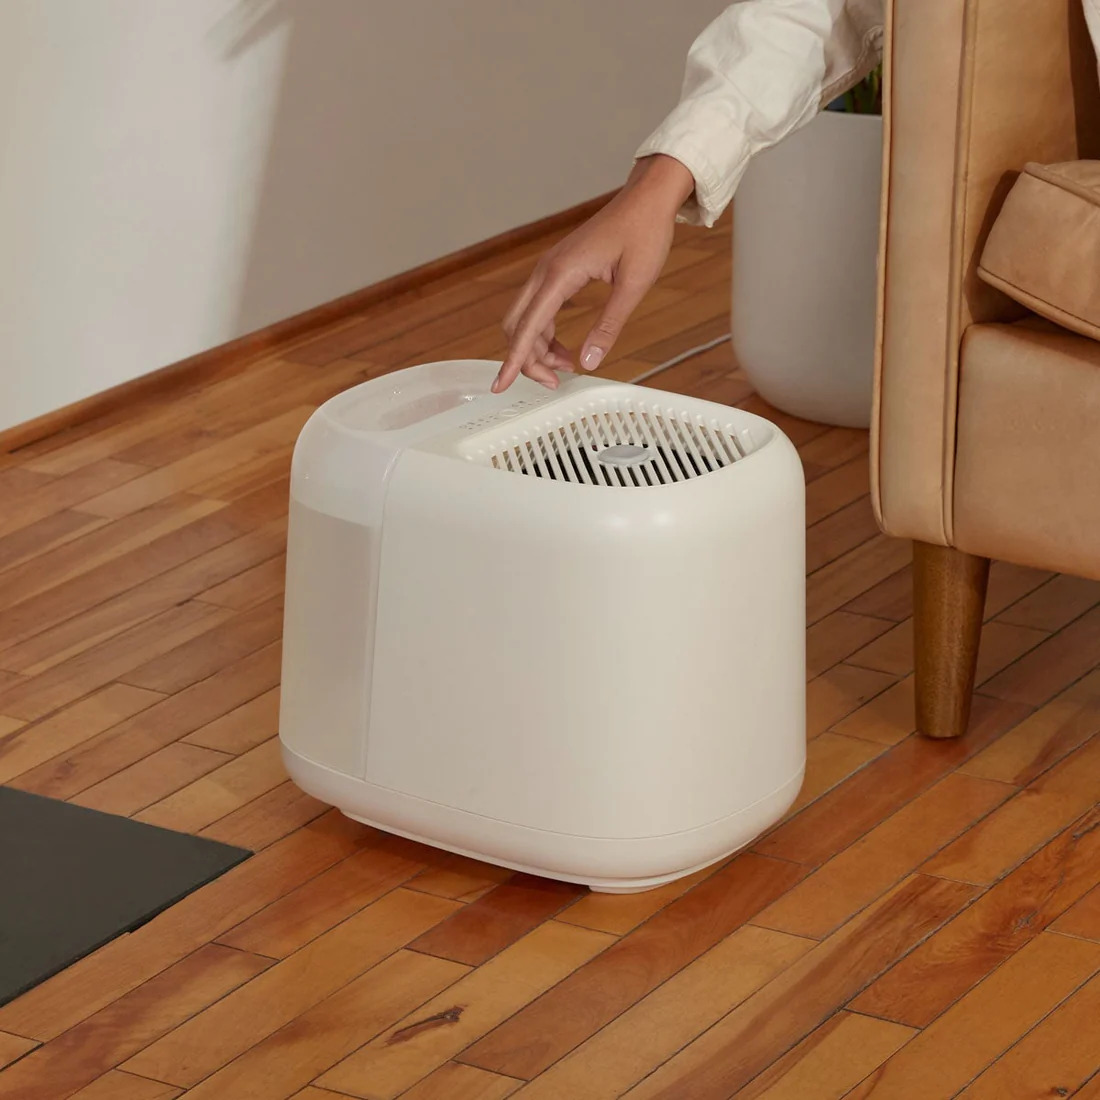 A hand turning on a Canopy Humidifier